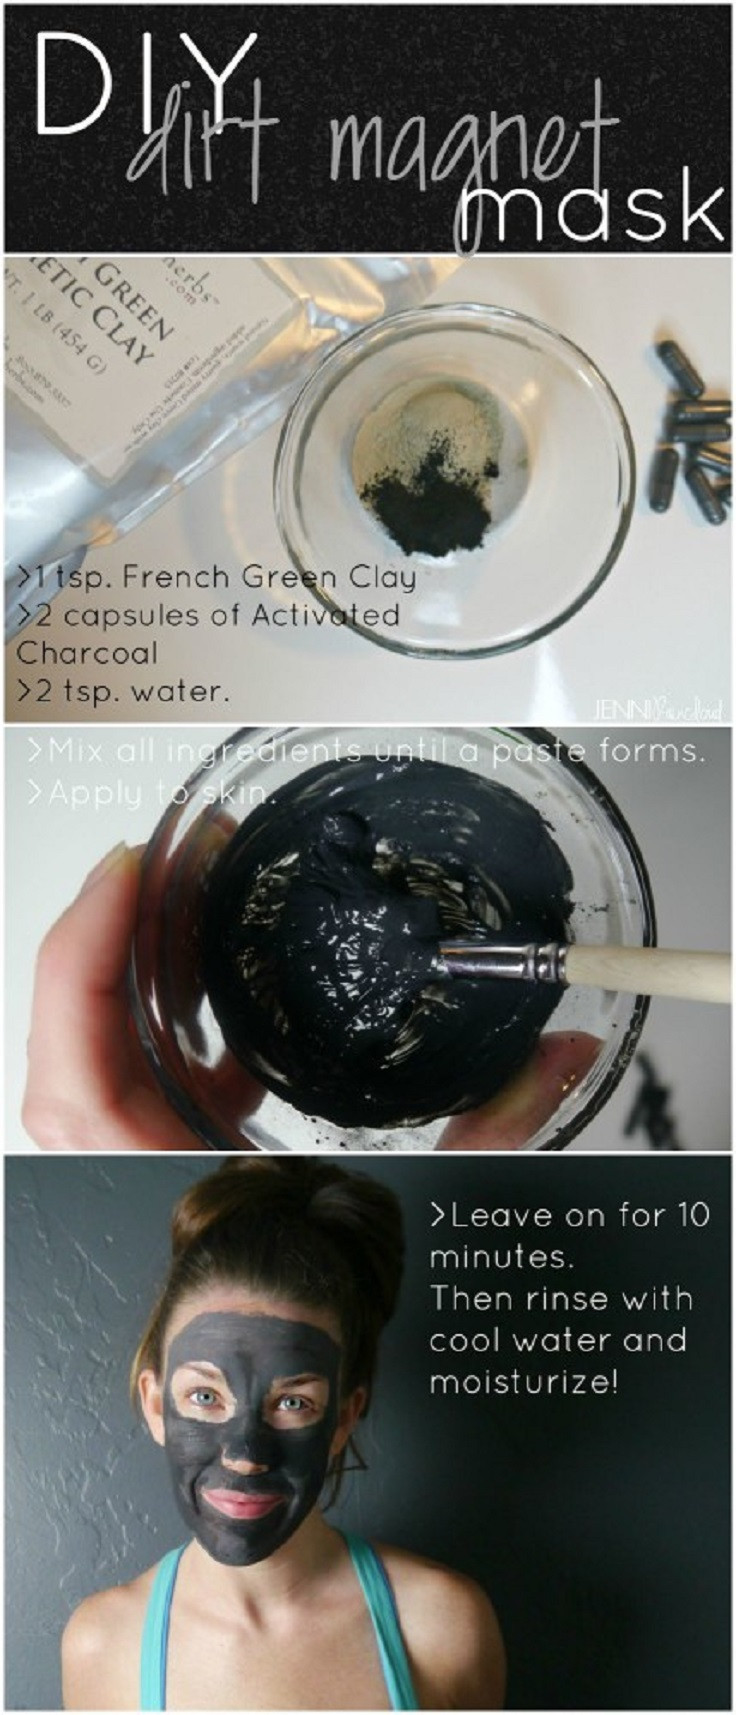 DIY Charcoal Mask Recipe
 15 Best DIY Charcoal Mask Recipes and Beauty Products